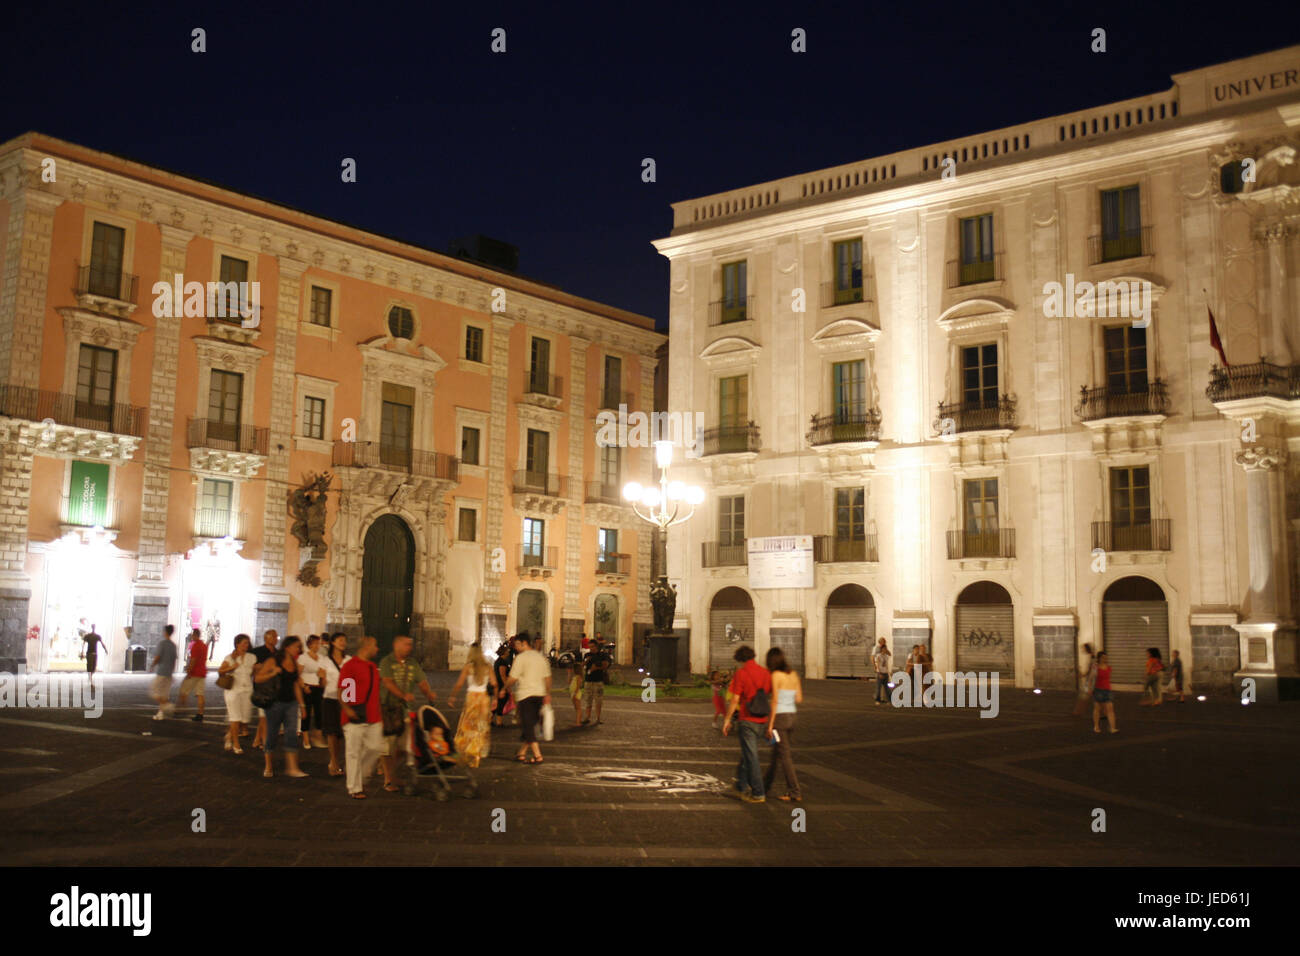 Italy, Sicily, Catania, Piazza Universita, Palazzo San Giuliano, tourist, evening, Southern Europe, island, town, houses, buildings, structures, architecture, places of interest, people, Stock Photo